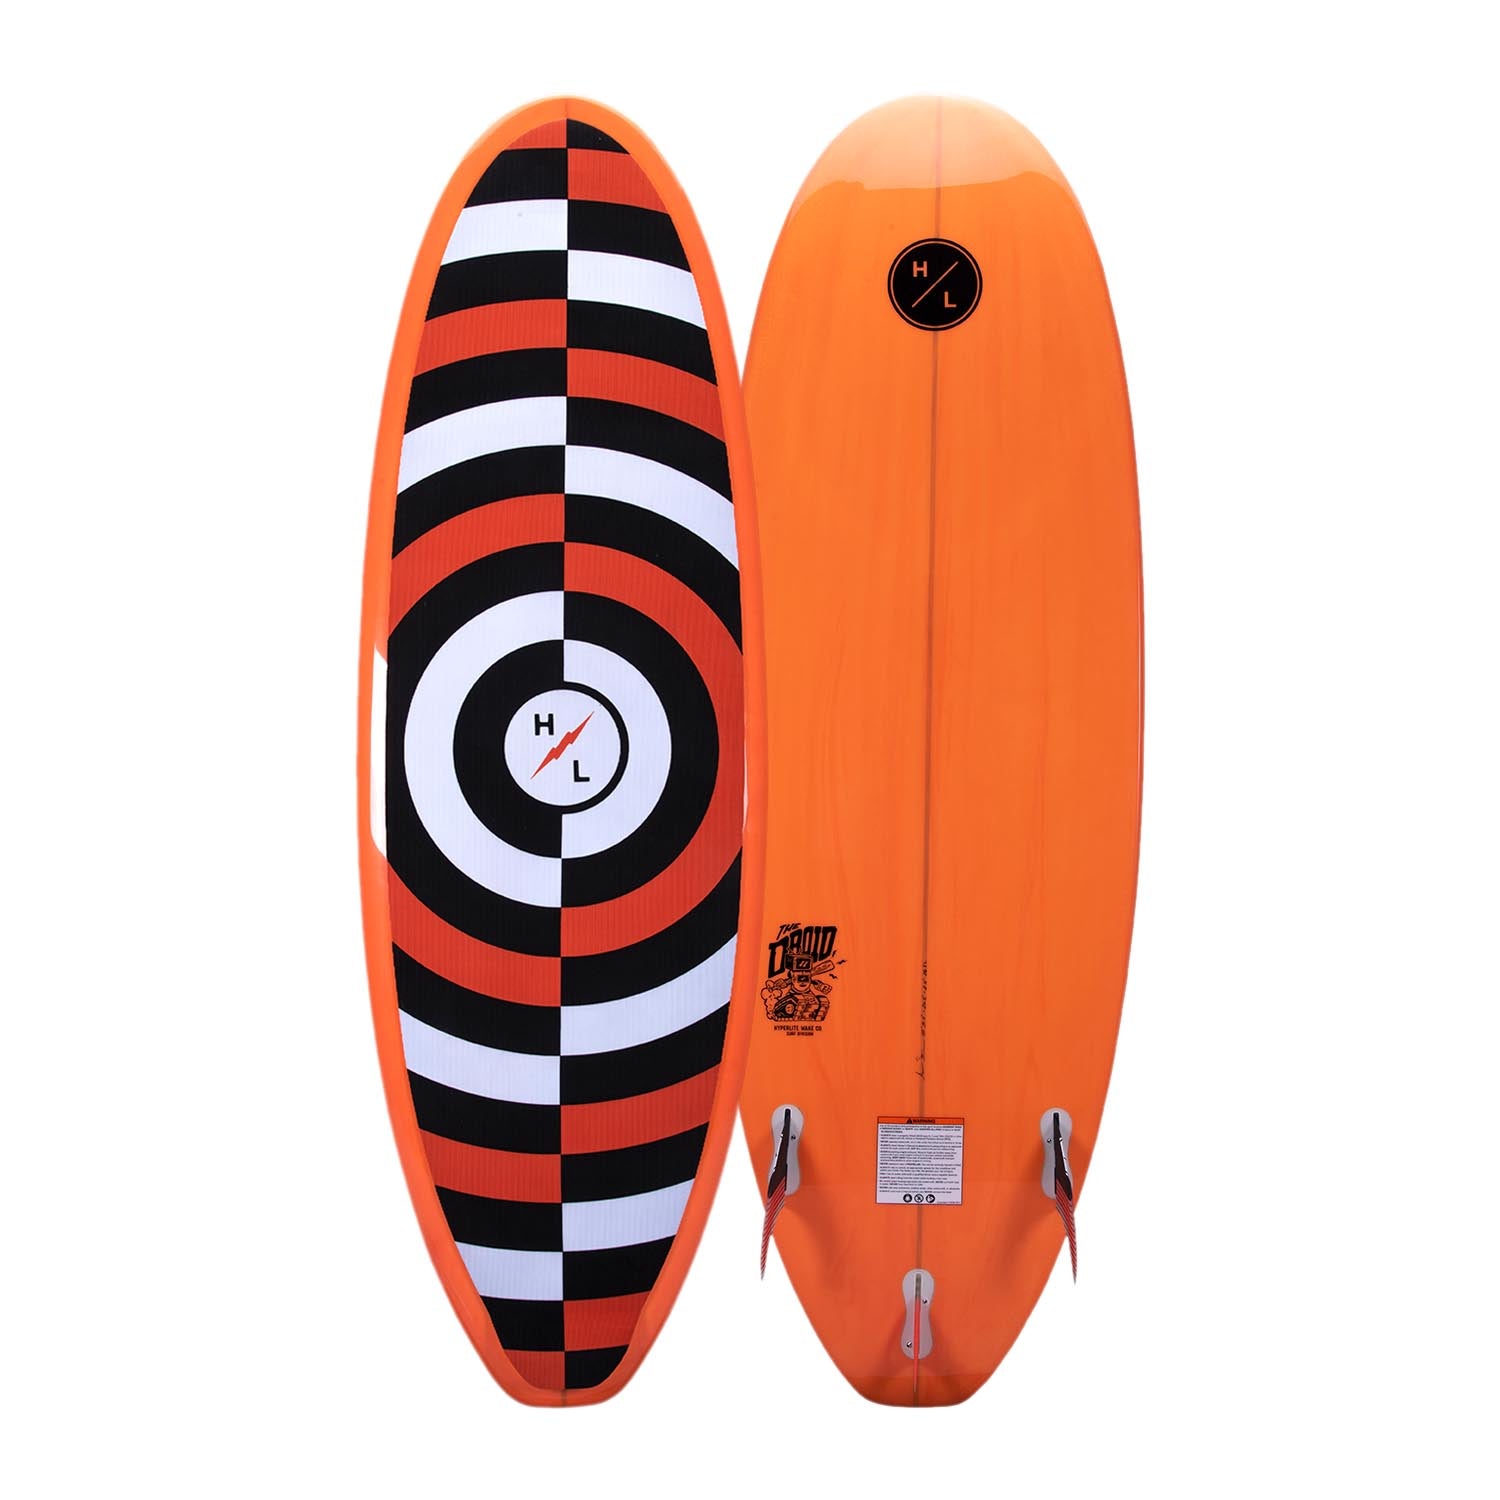 A Hyperlite surfboard with an orange and black design, ideal for longboard style surfers.